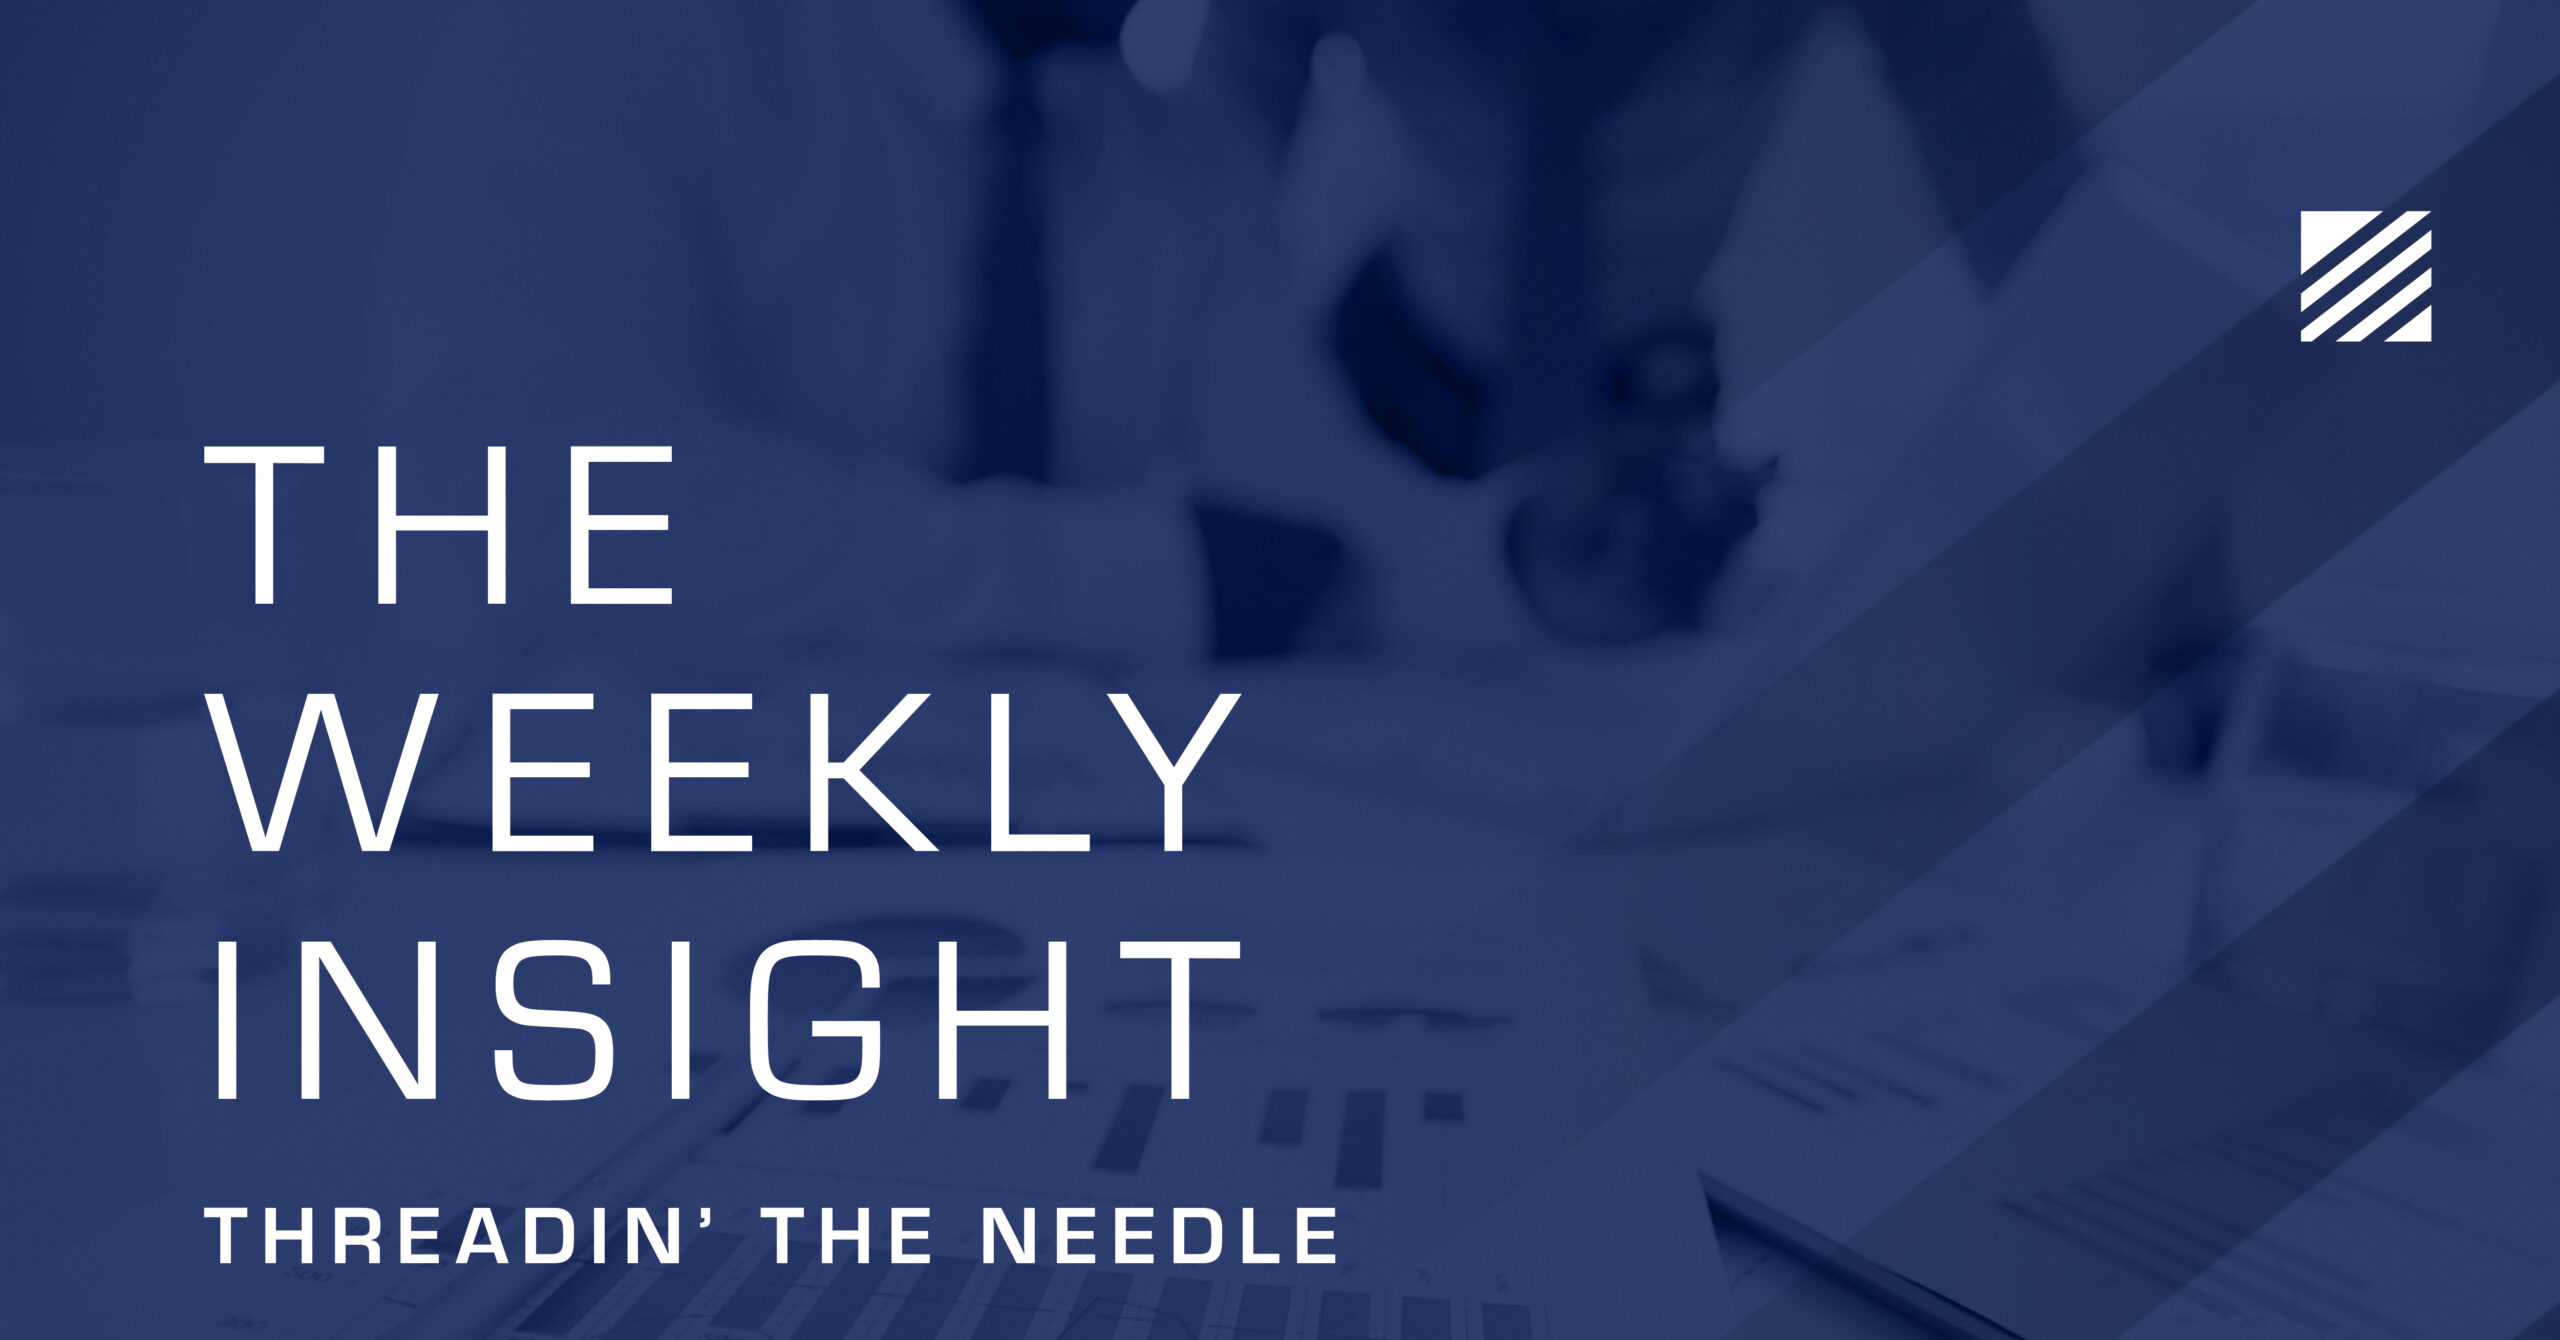 The Weekly Insight: Threadin' the Needle Graphic